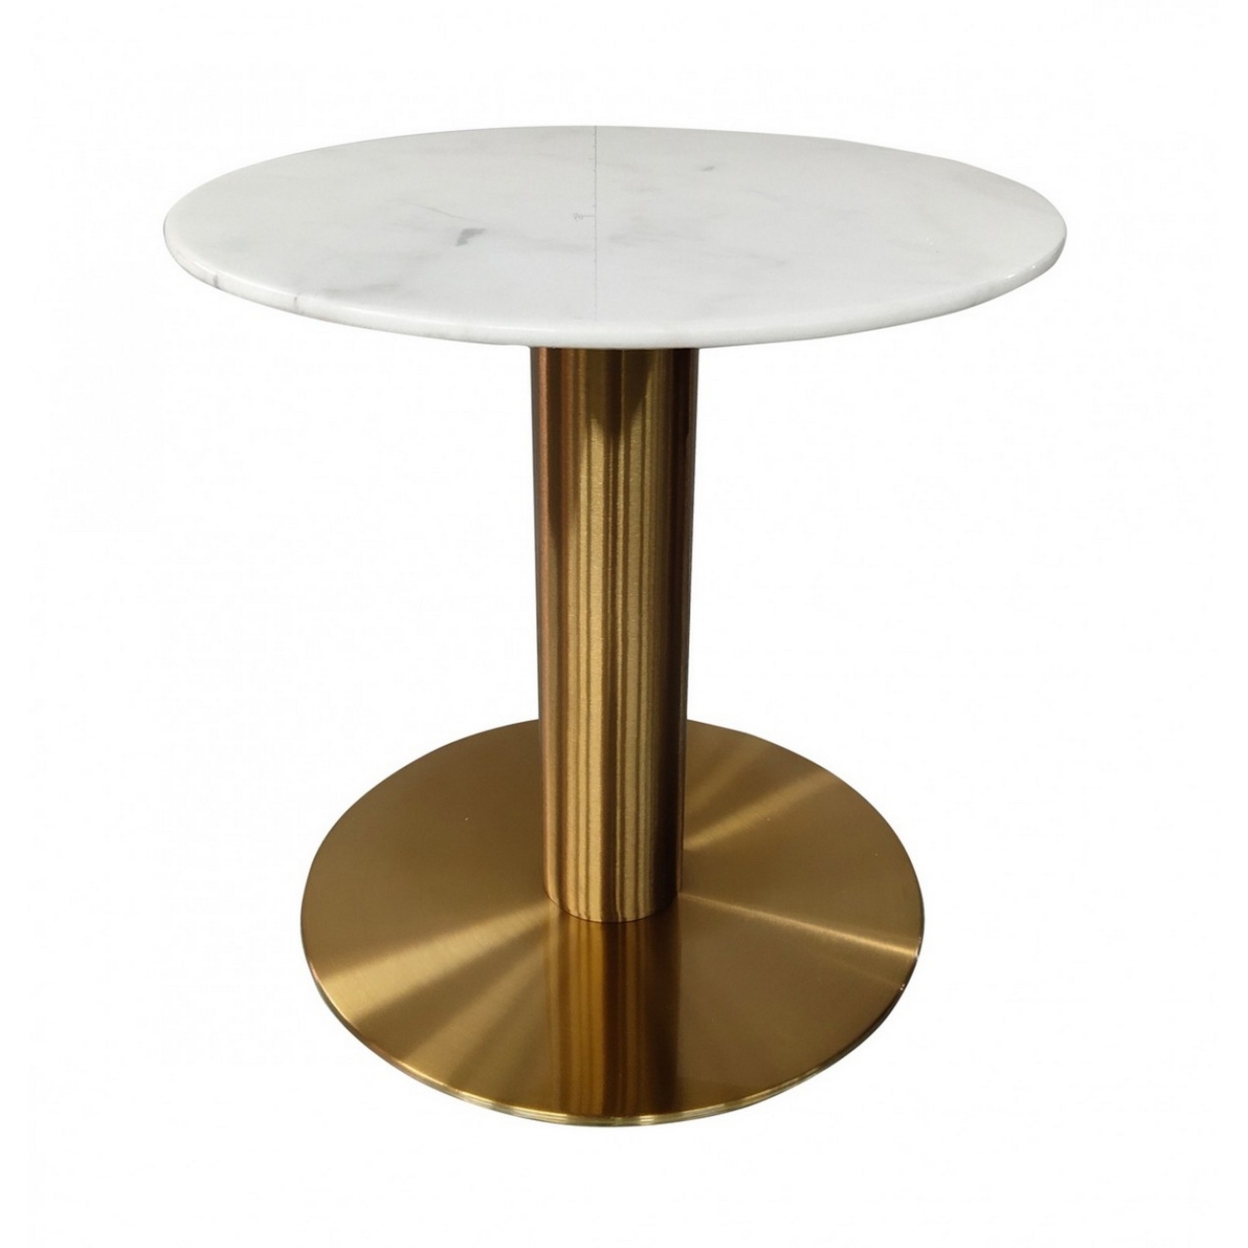 20 Inch Marble Top End Table With Pedestal Base, White And Gold- Saltoro Sherpi